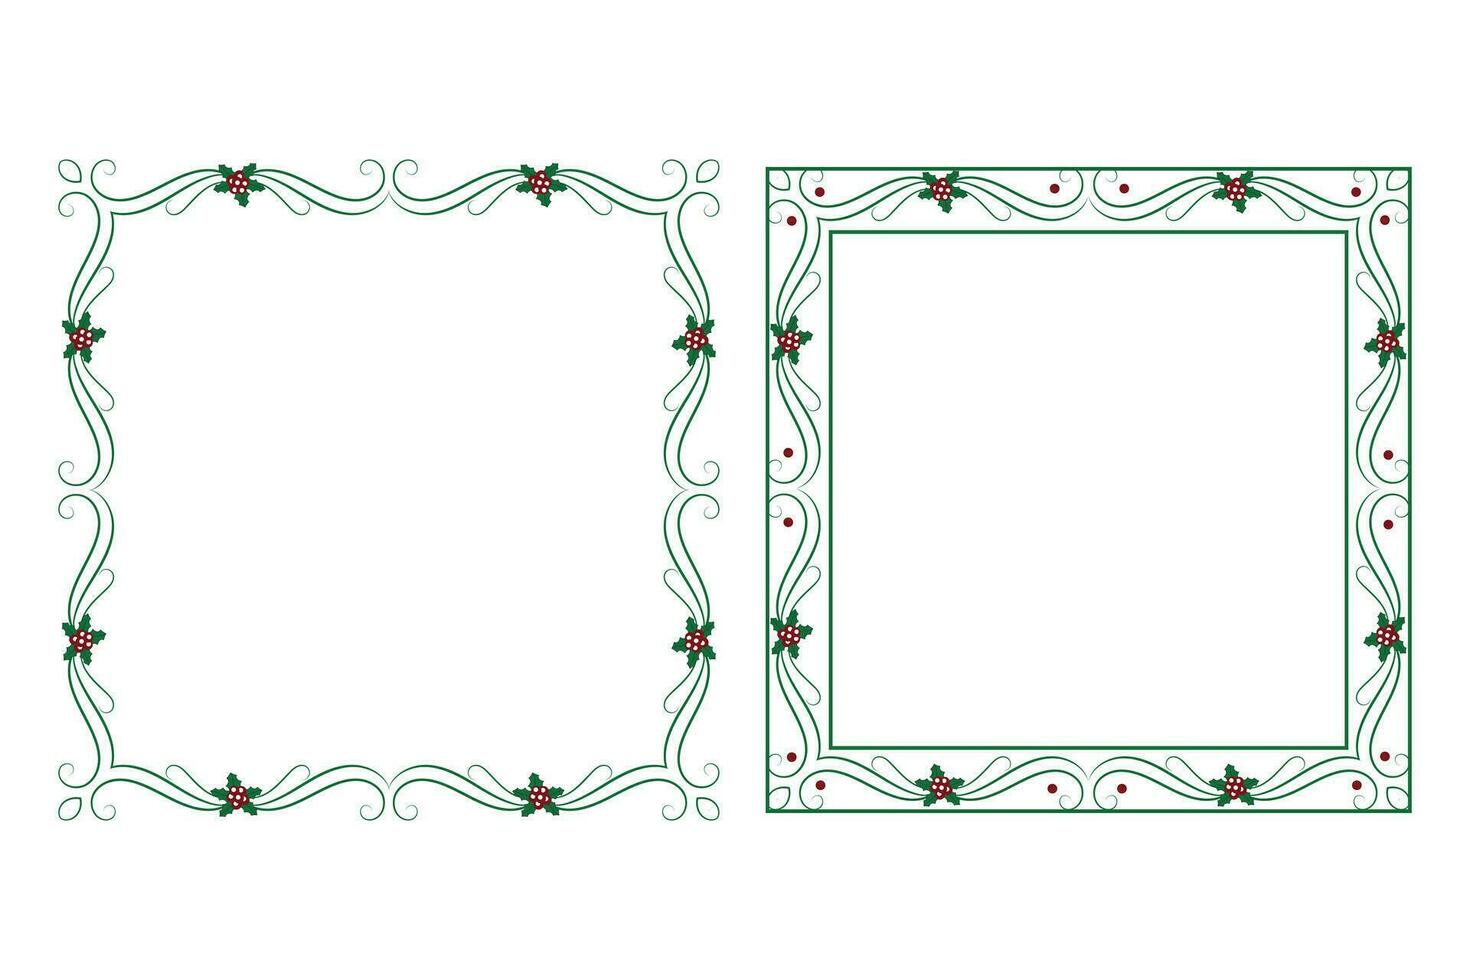 Decorative ornamental Christmas border frame, Merry Christmas holly leaves Square frames, ornament frame border corner Decoration, Wedding greeting cards invitation card holiday page borders vector